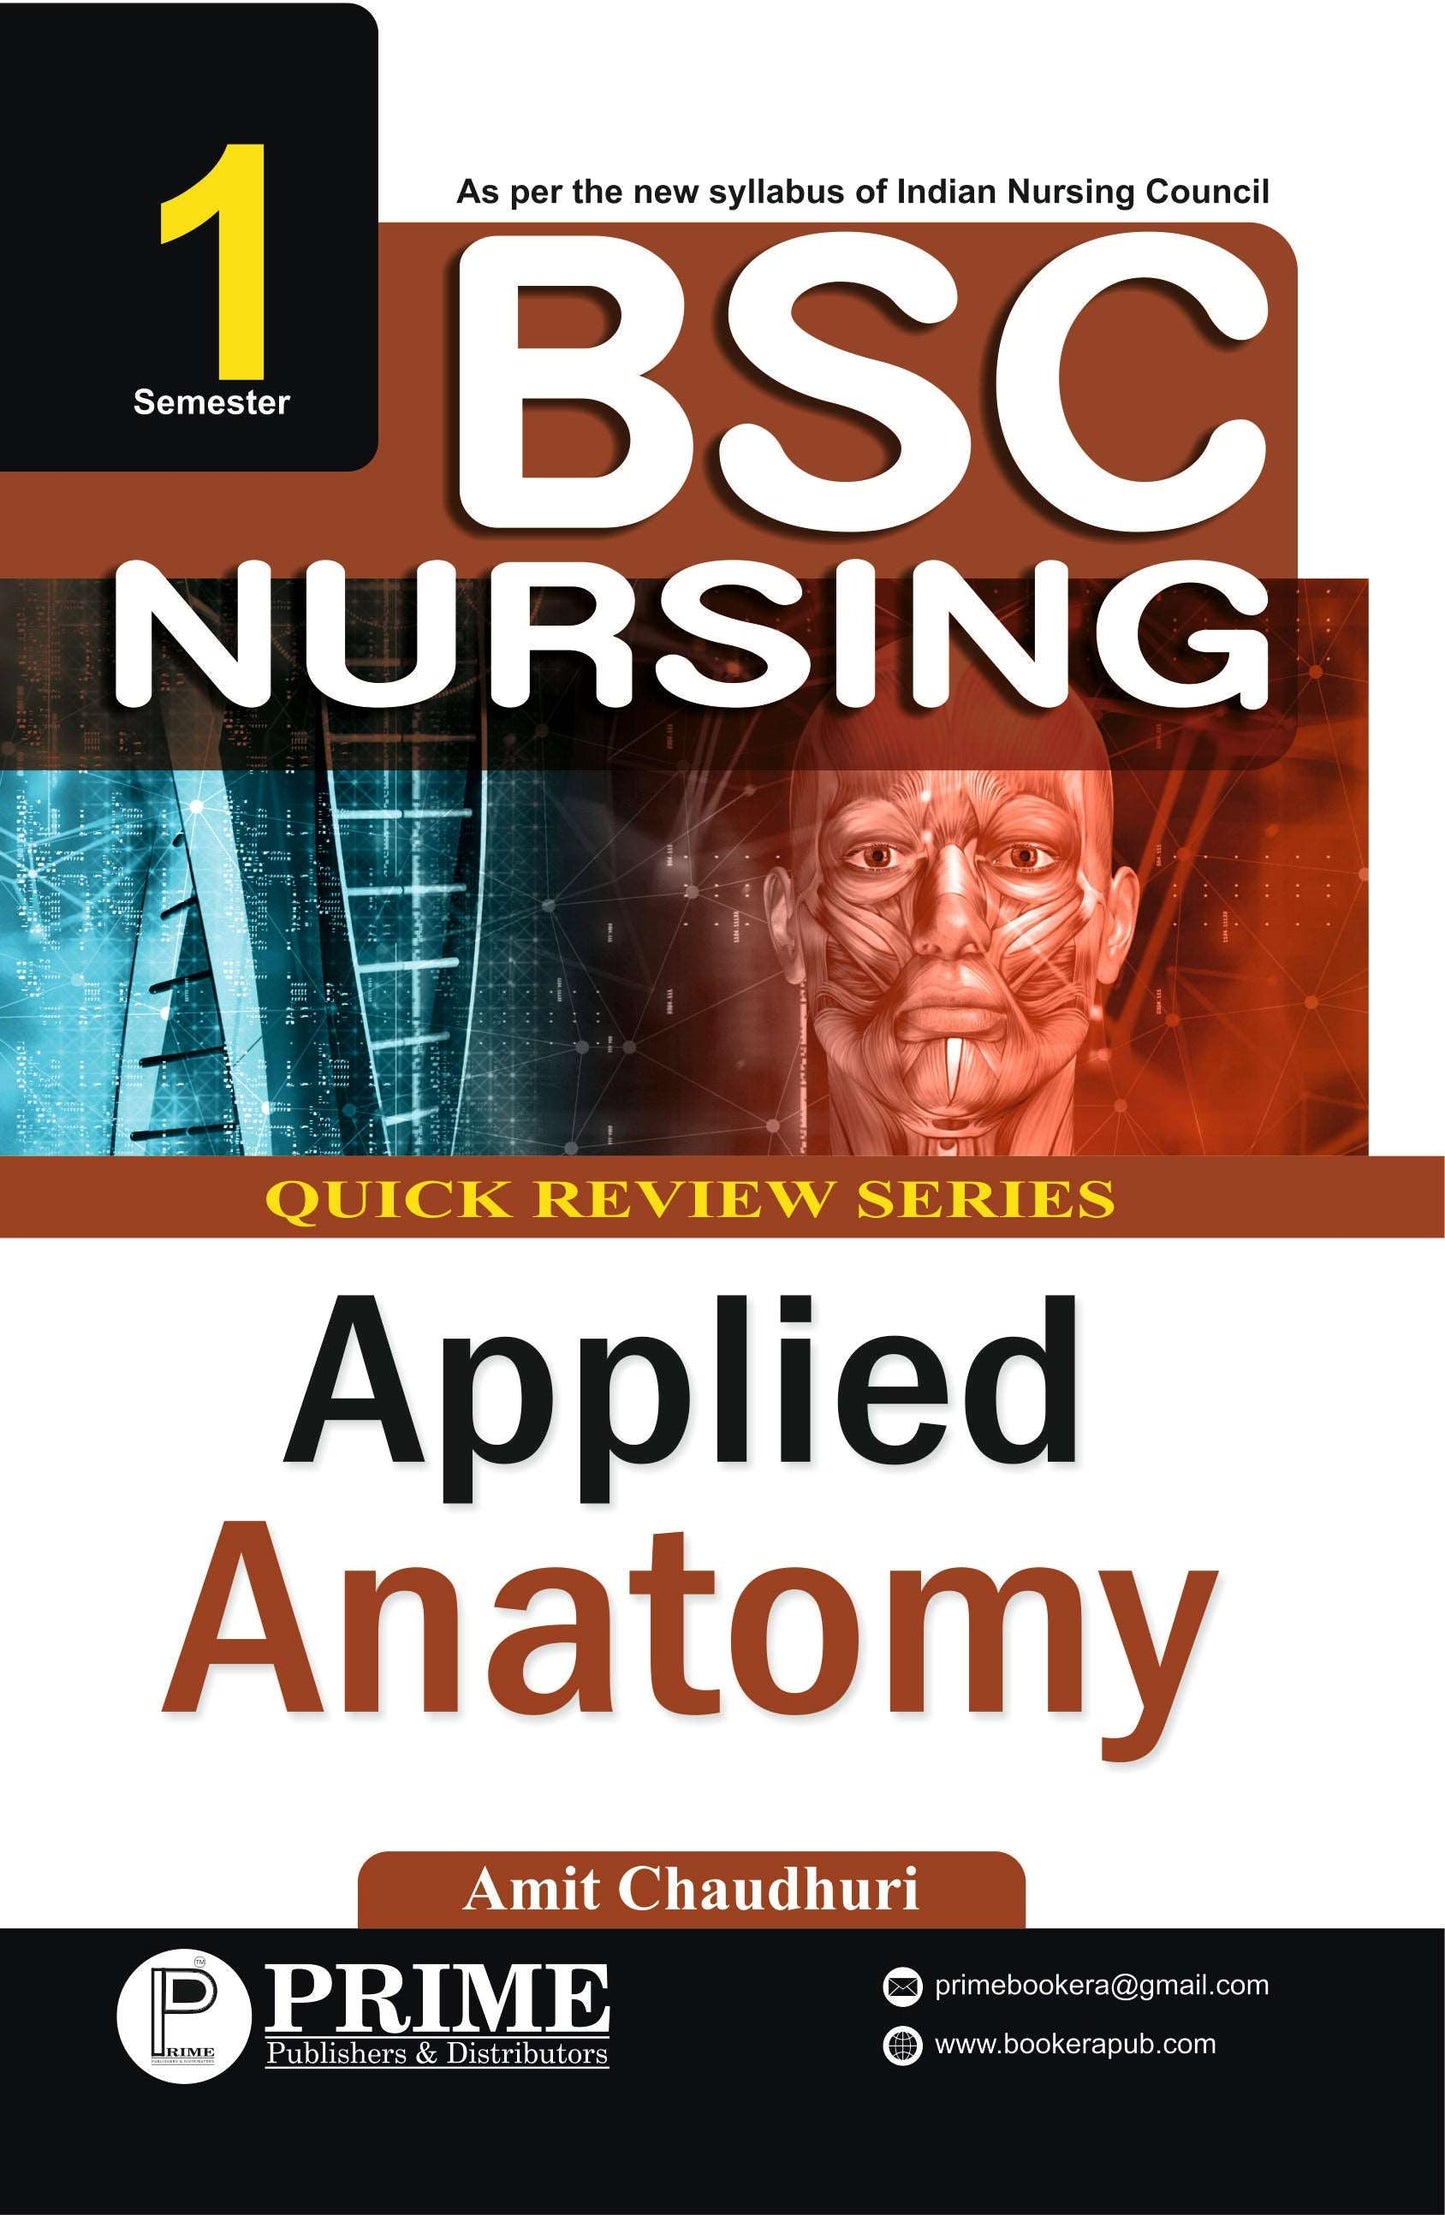 Quick Review Series of Applied Anatomy